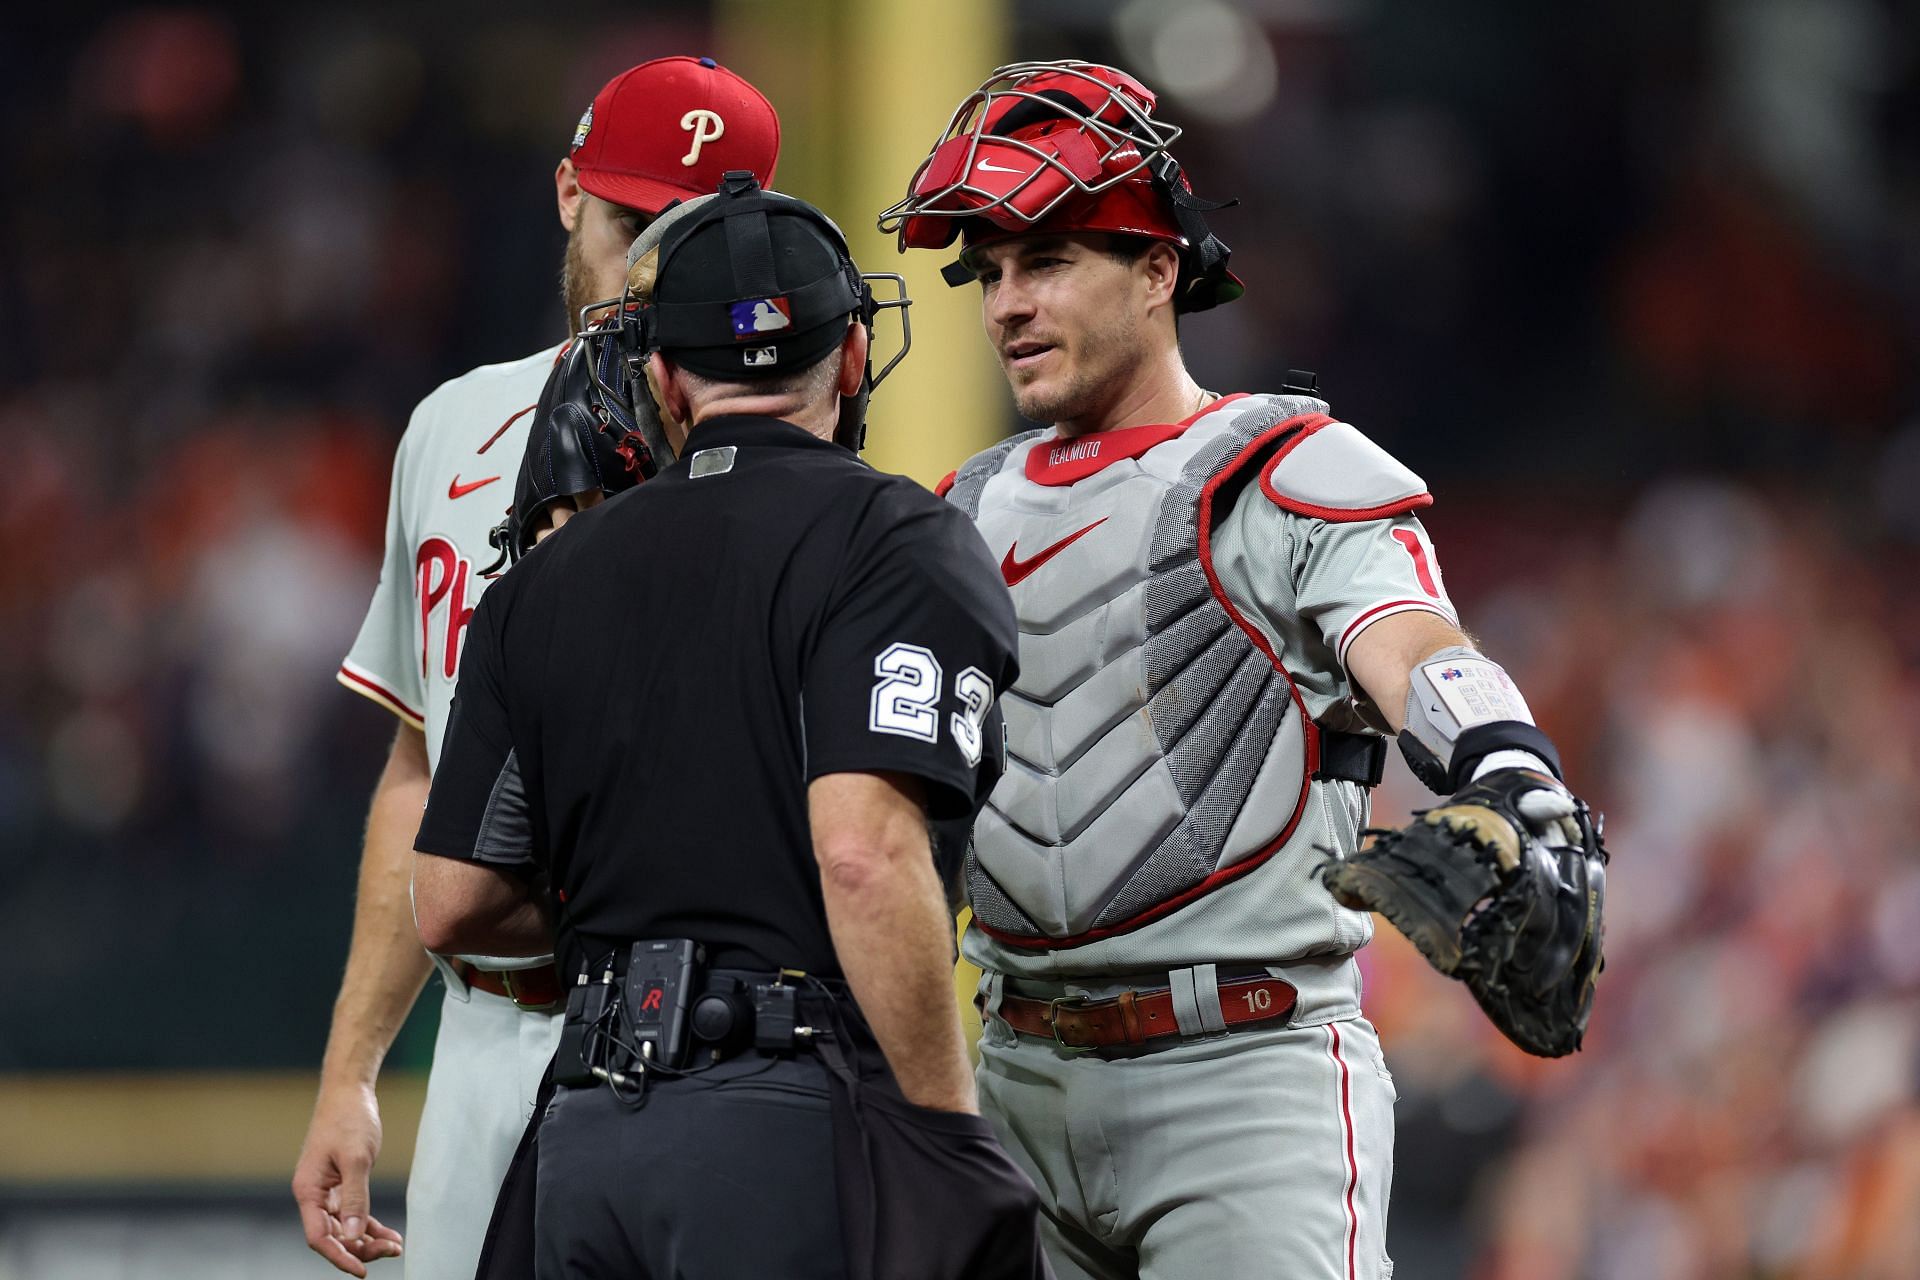 Phillies Catcher JT Realmuto Gets Ejected By Umpire For Doing